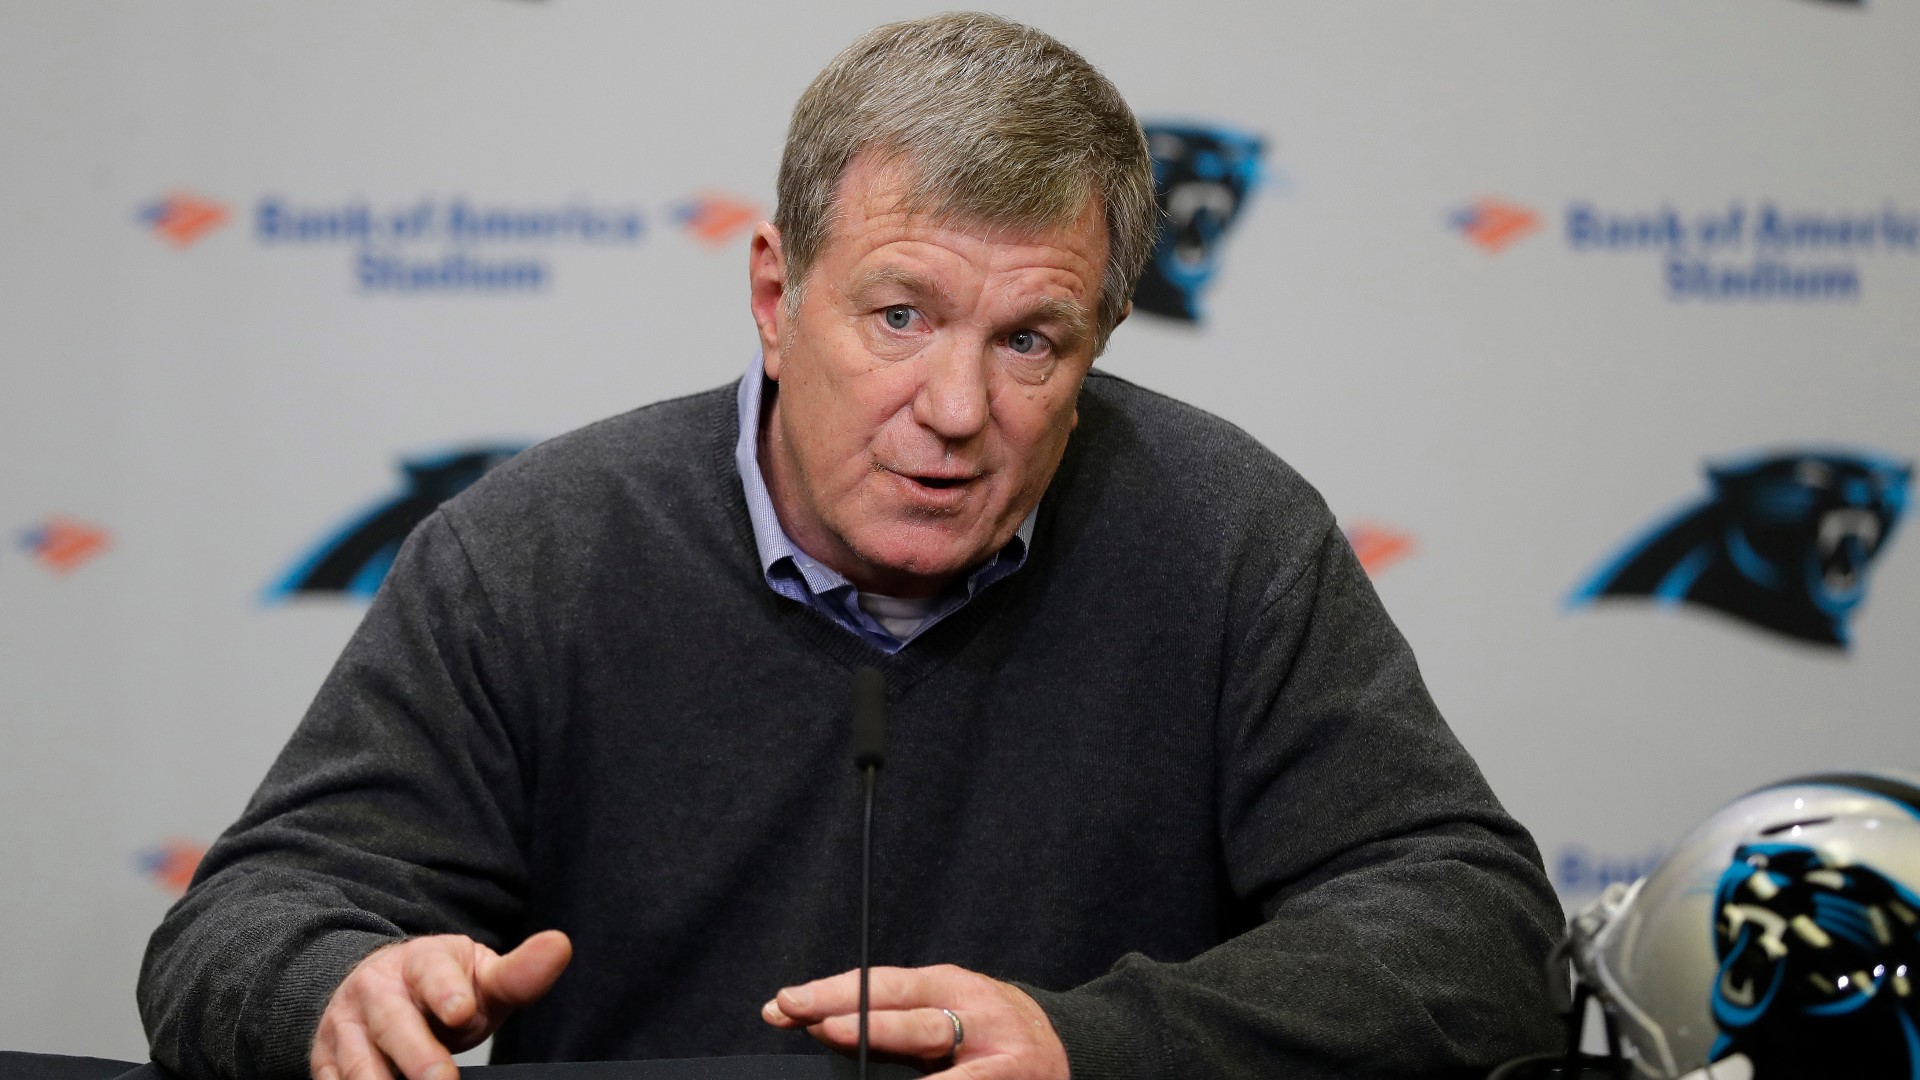 Hurney began his second stint as Panthers general manager in 2017. He helped build two teams that made Super Bowl berths in Carolina.